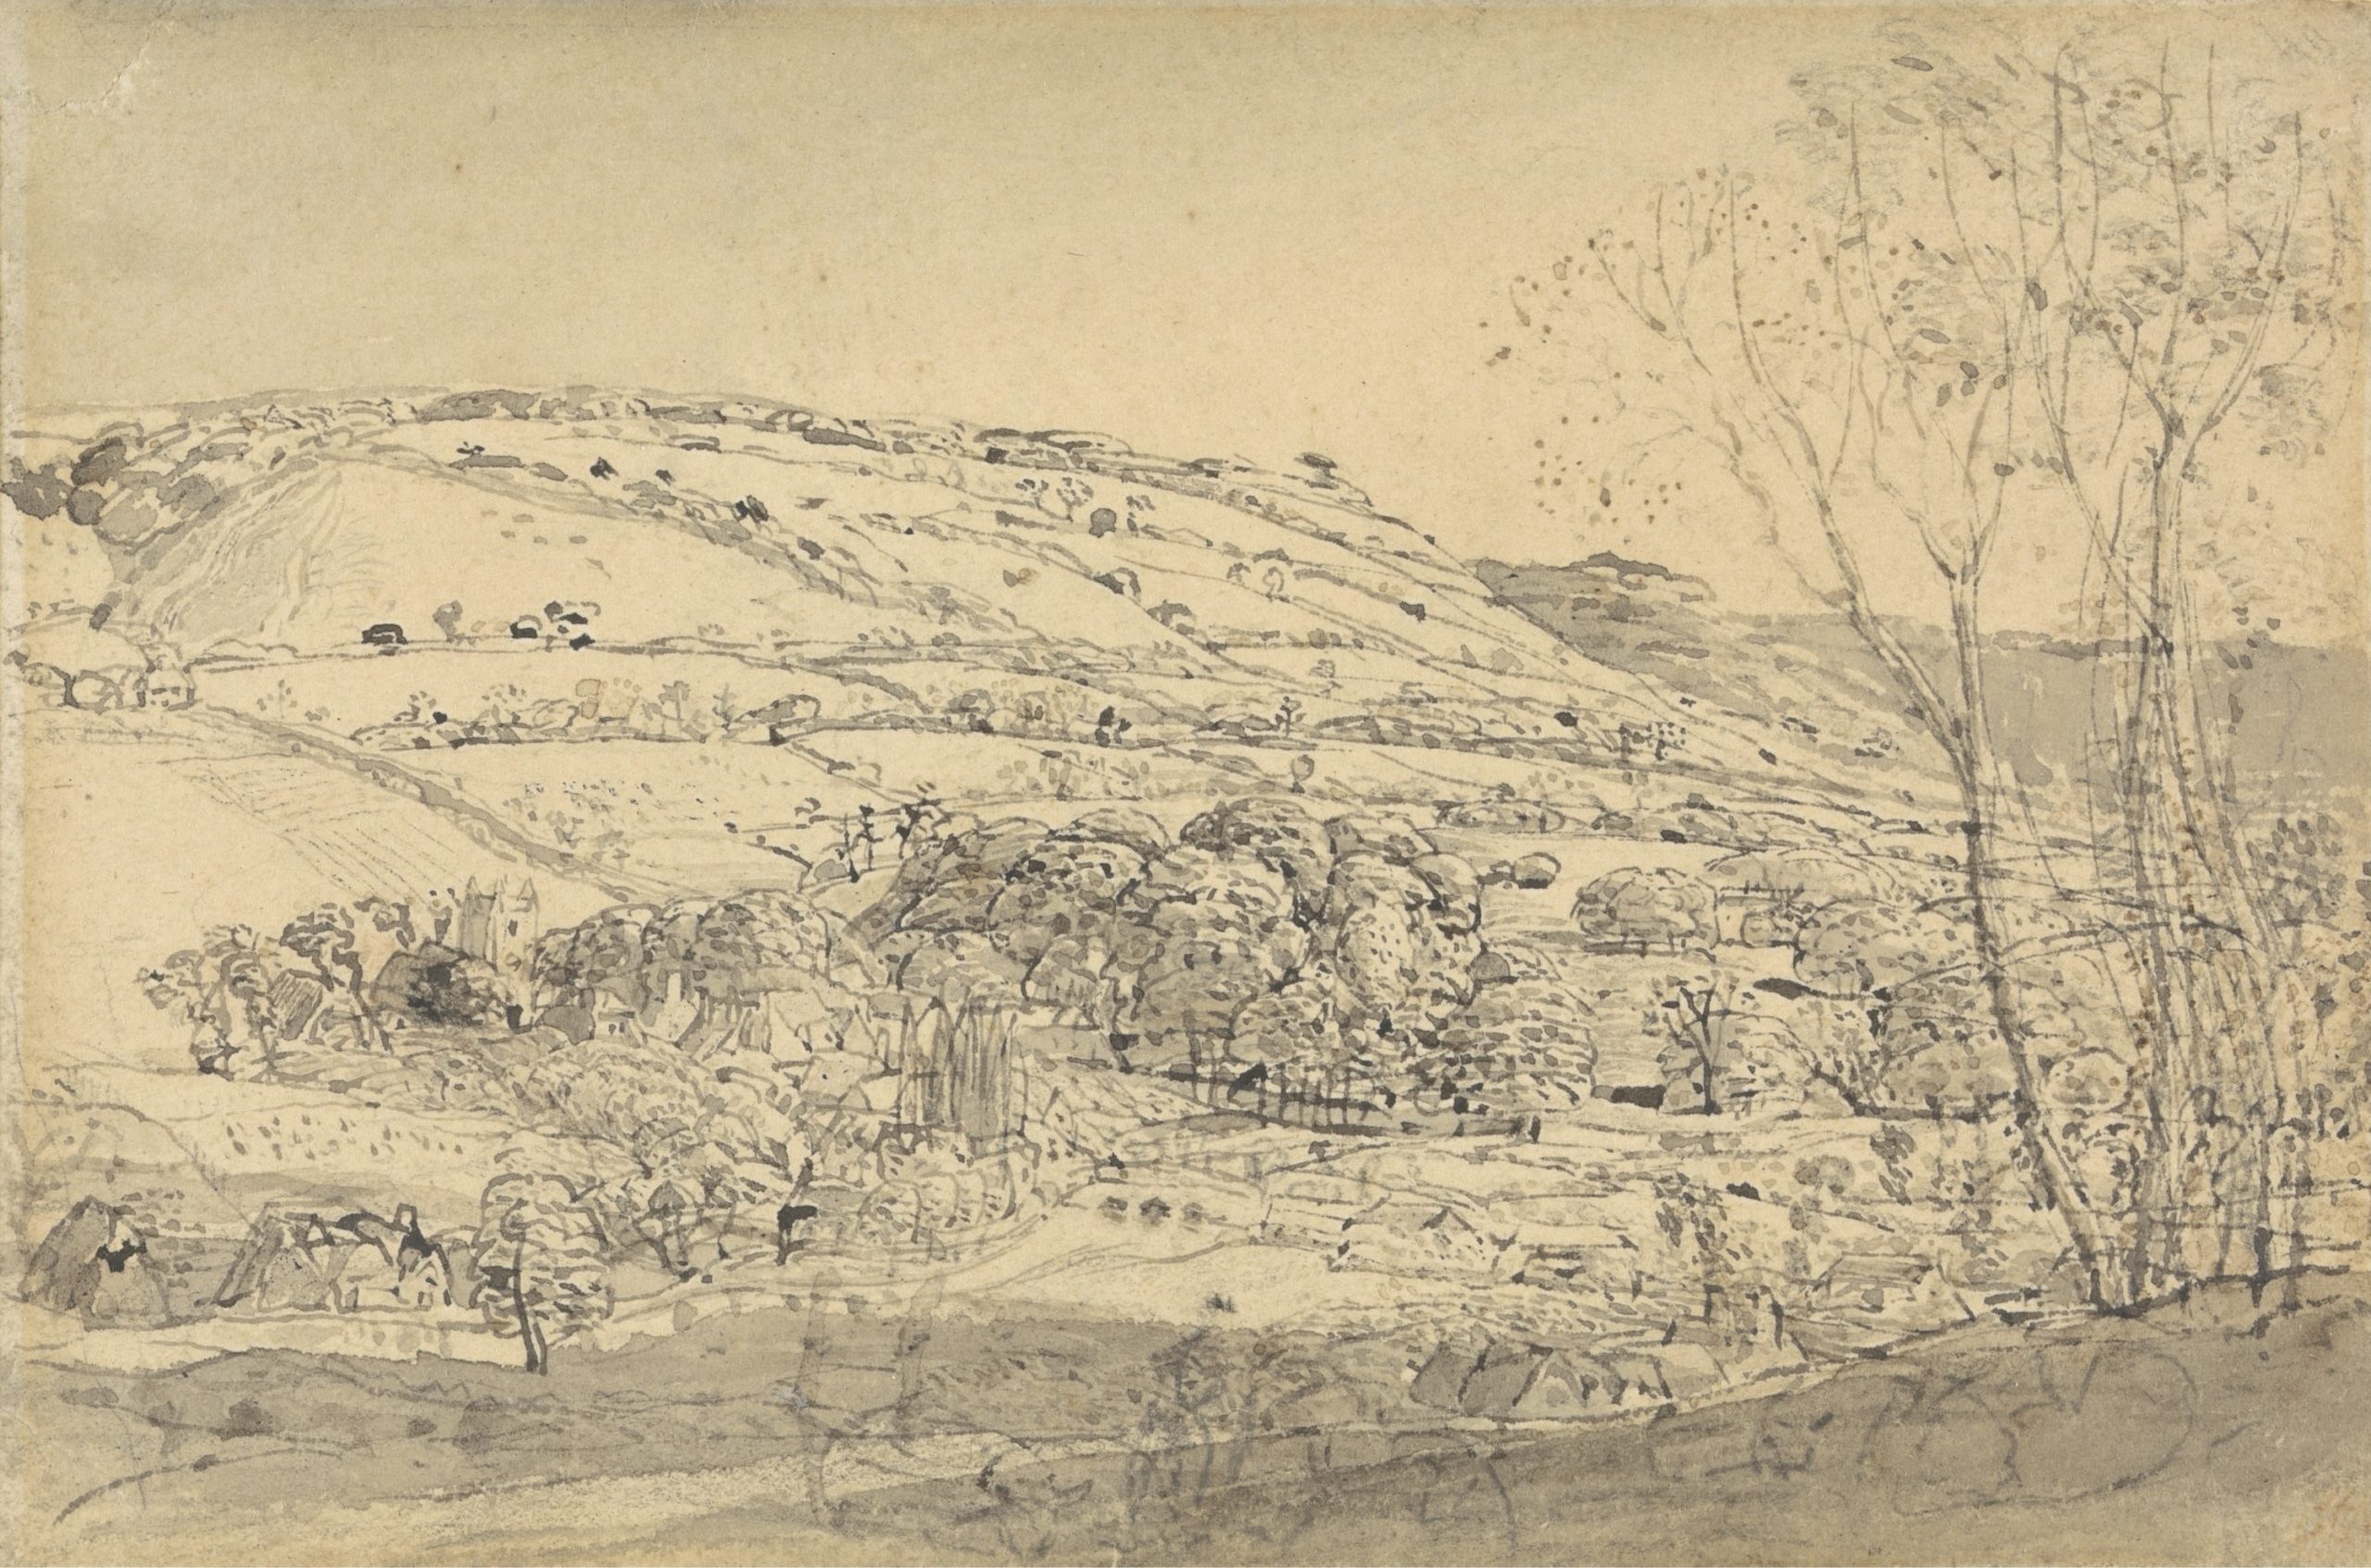 An old sketch of a valley with trees and fields